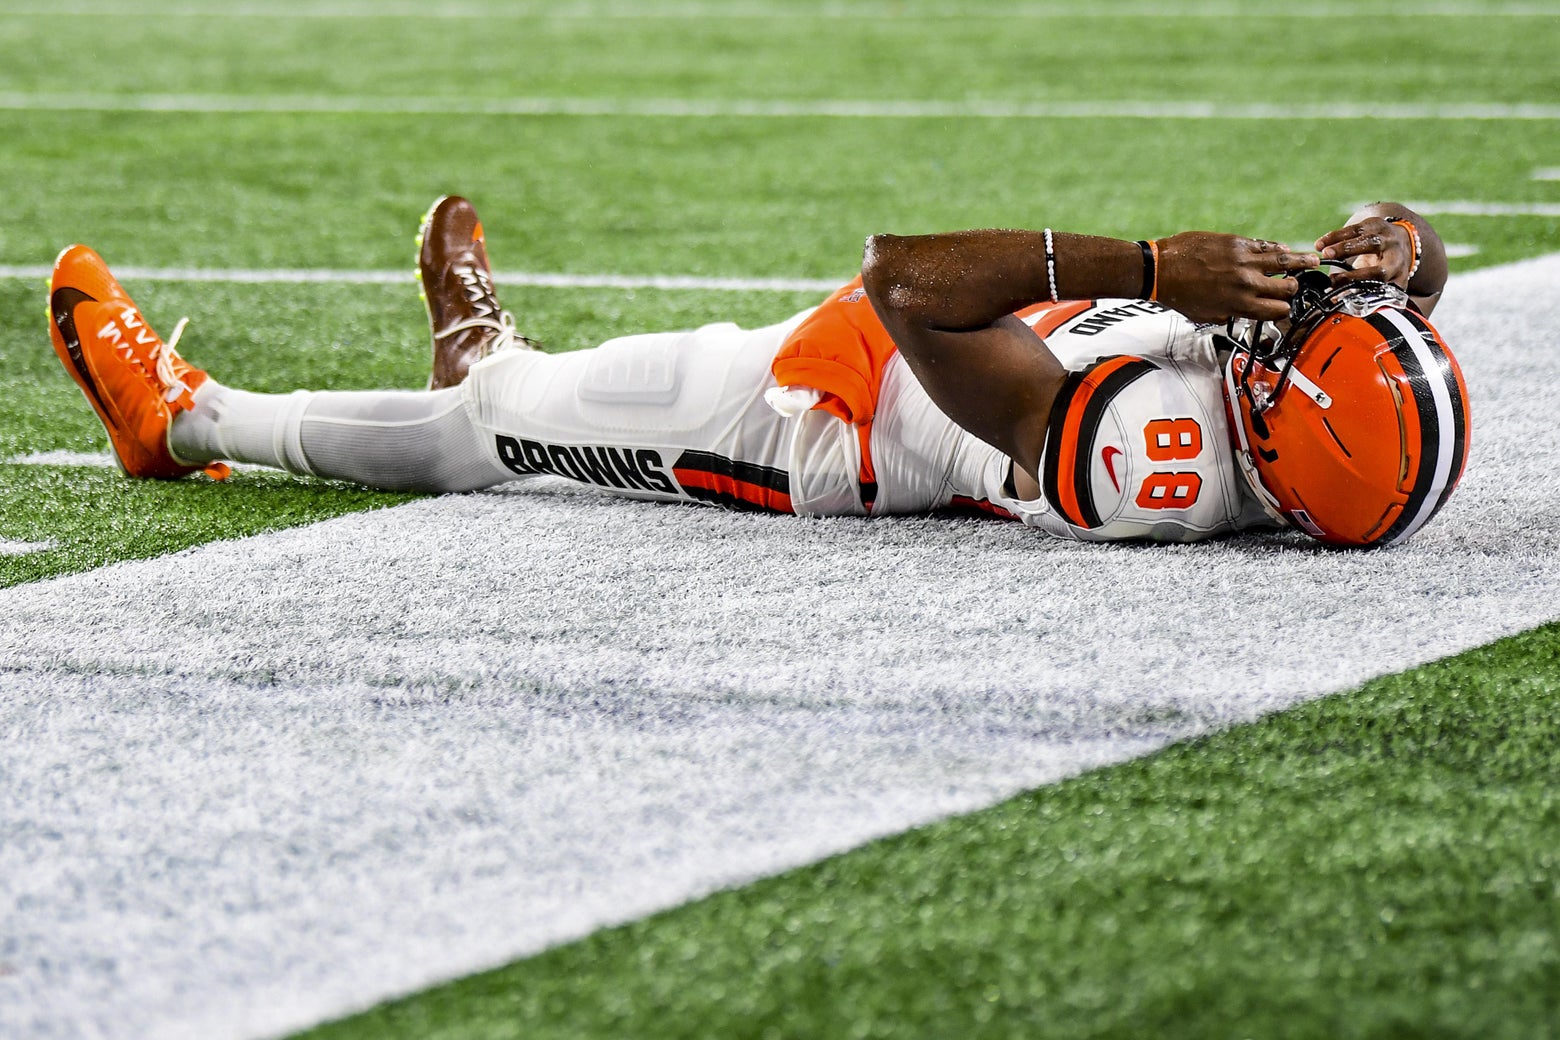 The Cleveland Browns were supposed to be good. (They are not good.)